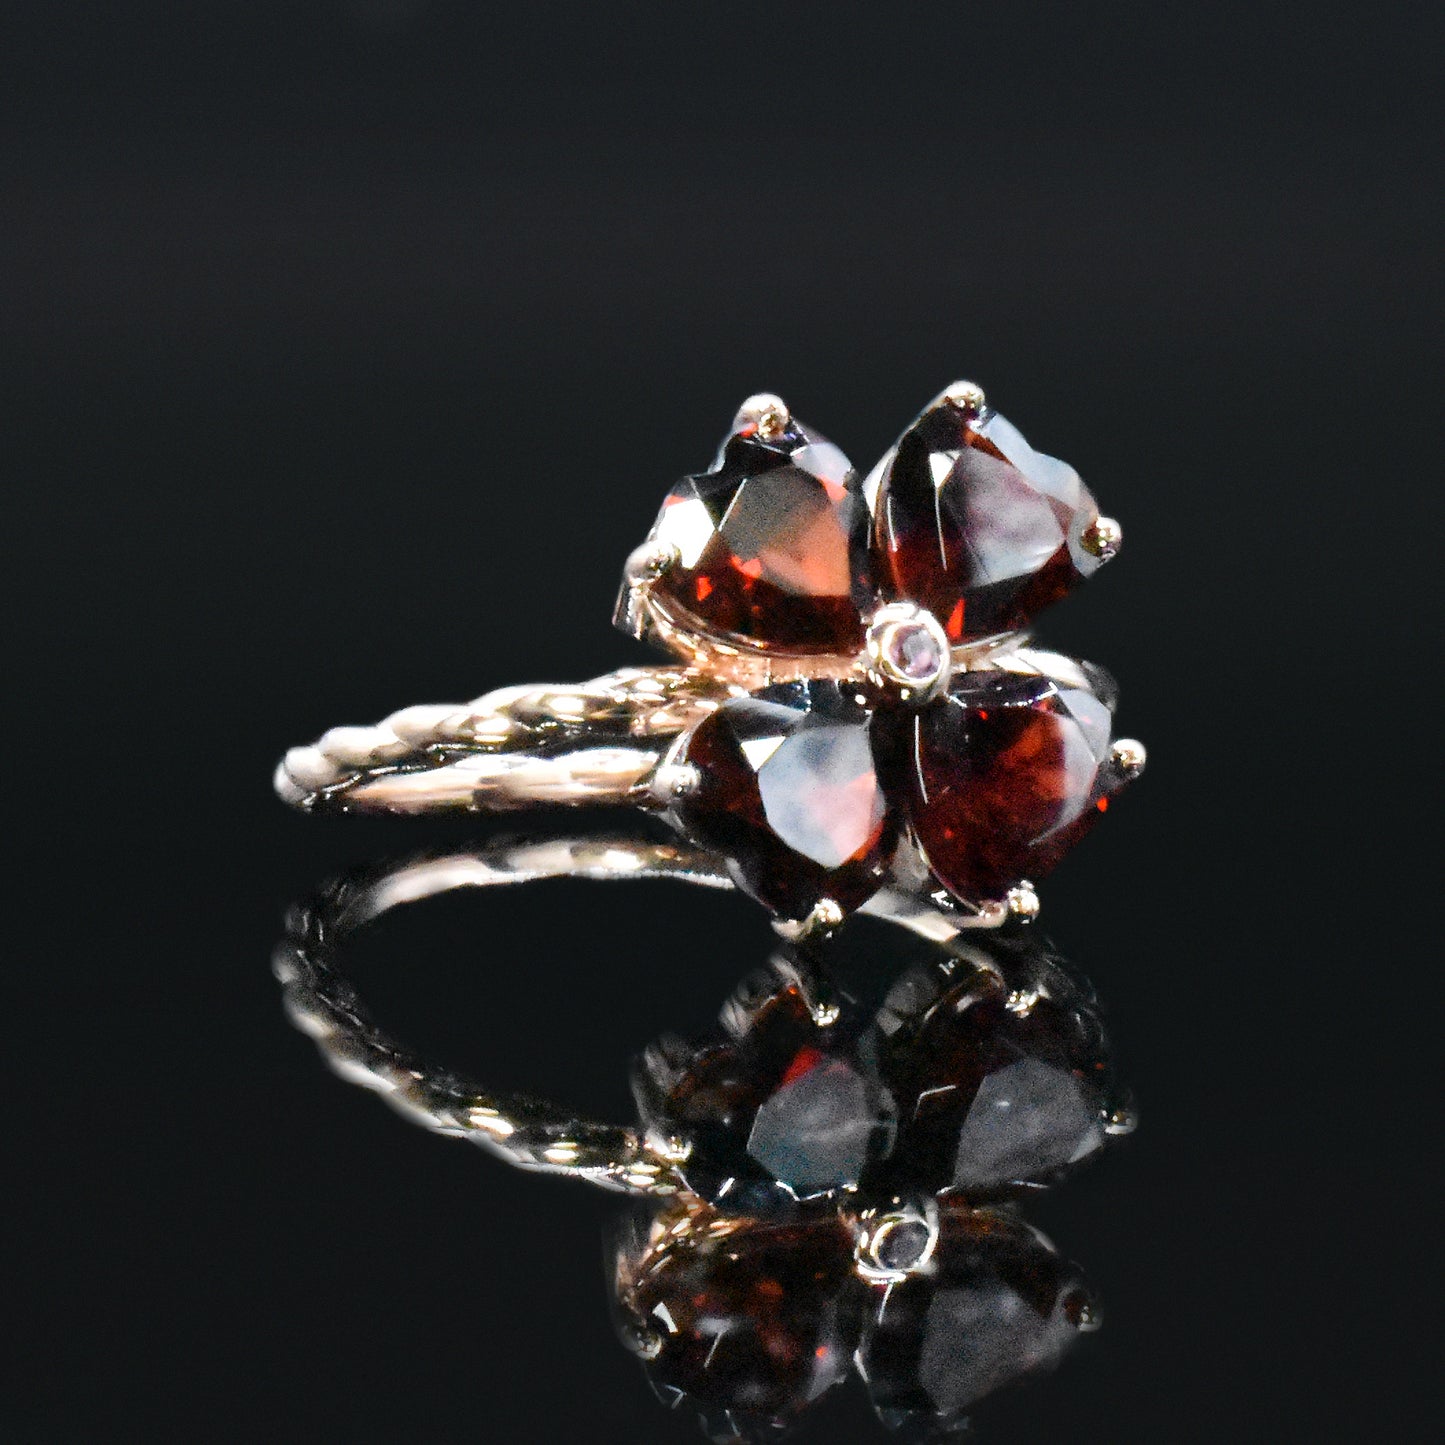 garnet four leaf clover ring with ashes inside for mourning